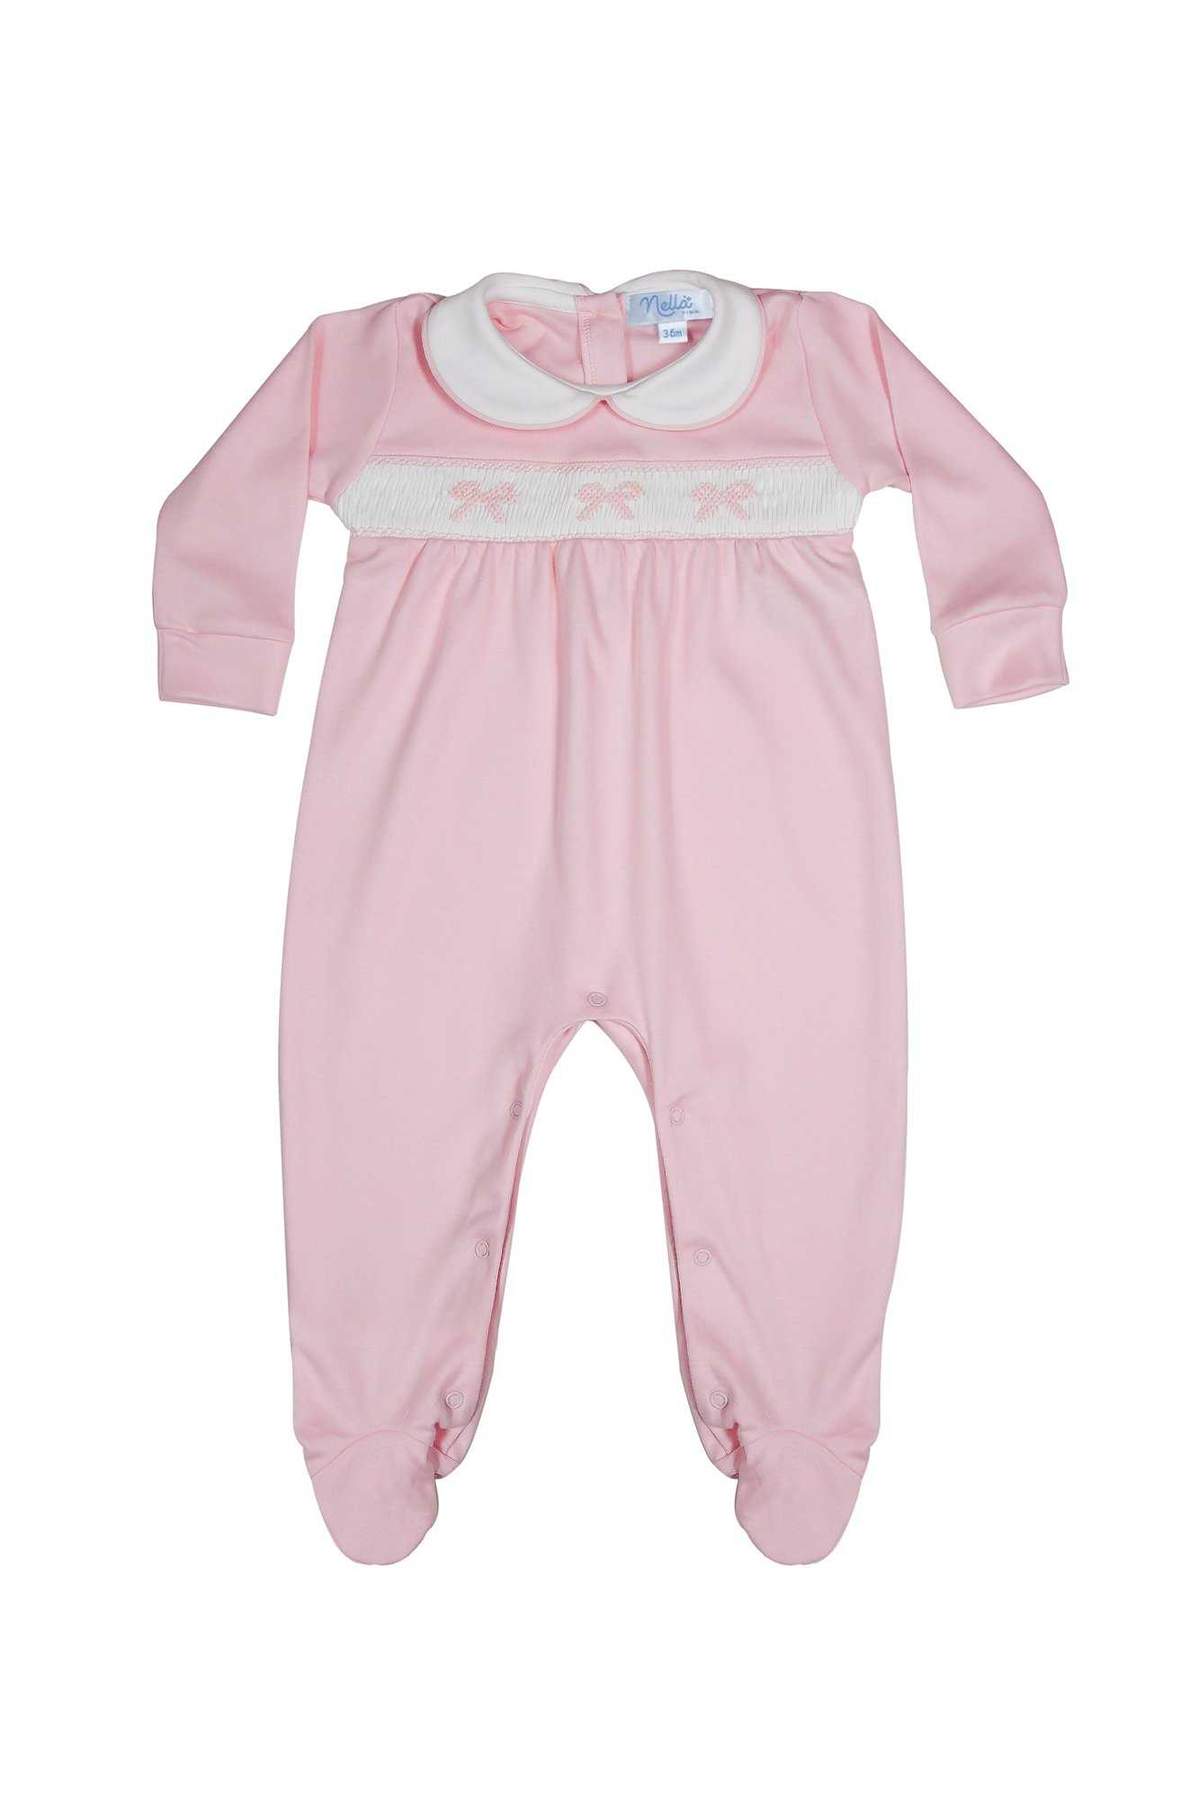 Pink Bows Smocked Baby Girl Footie